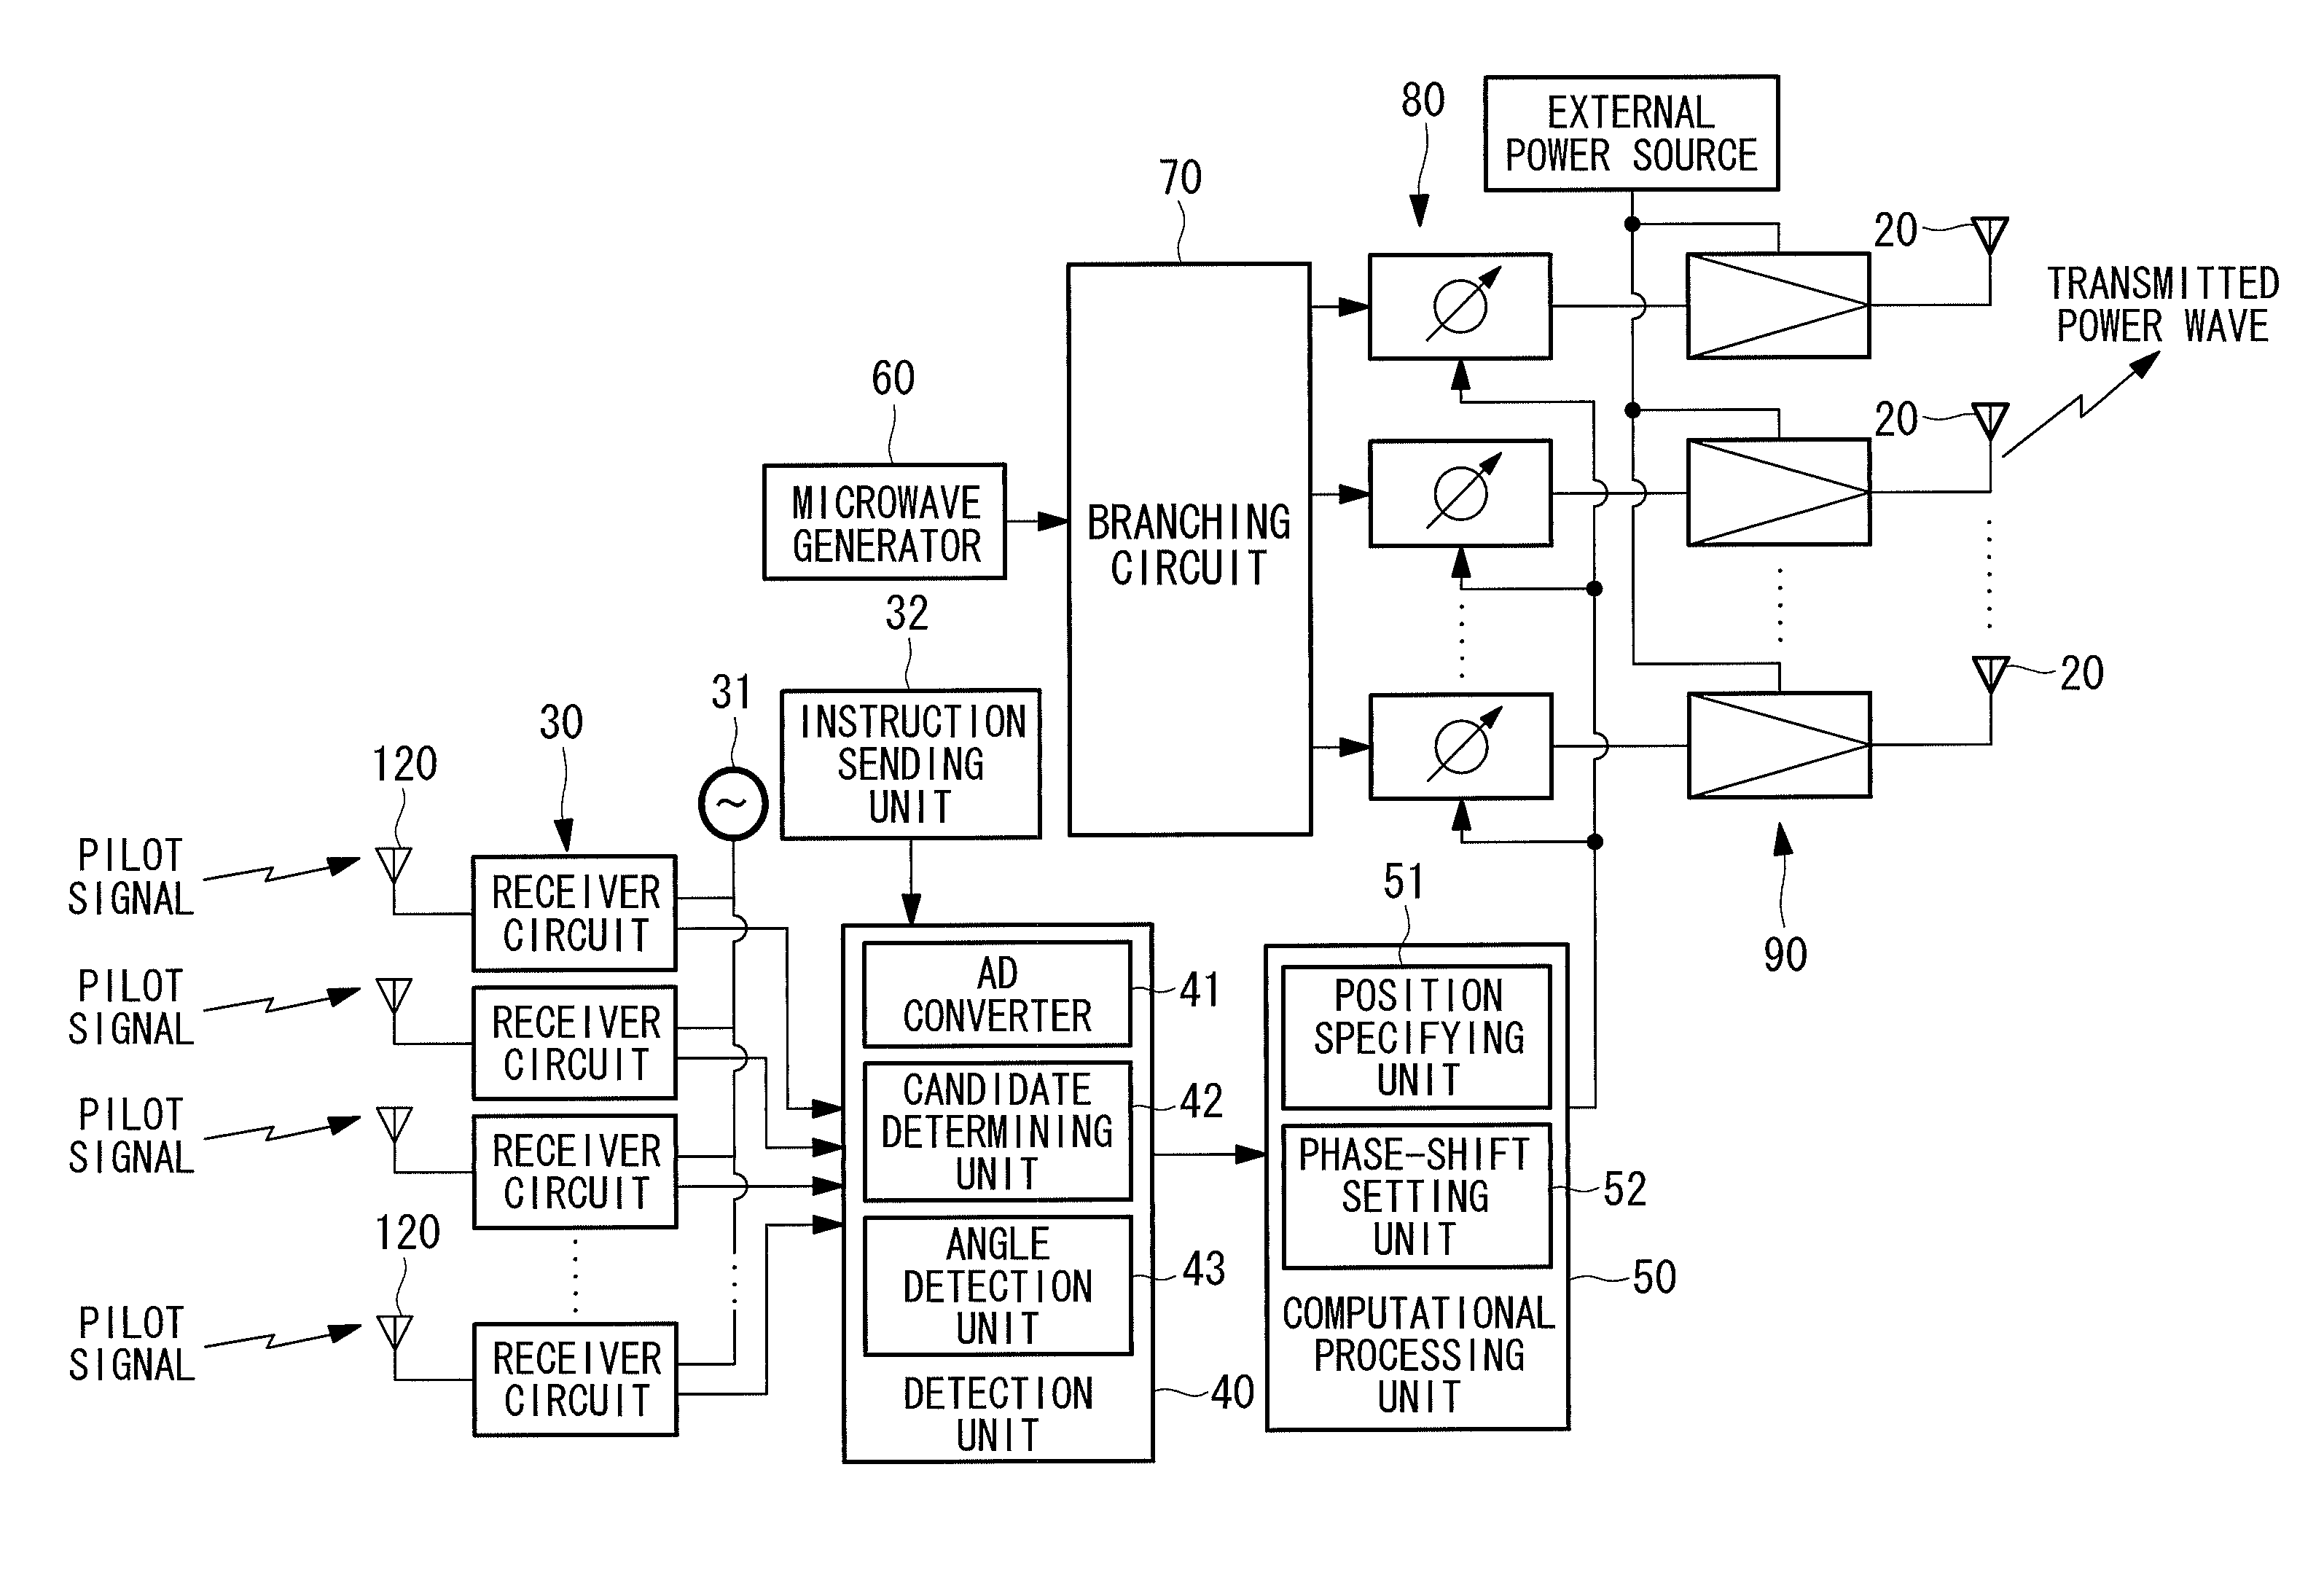 Phased-array antenna and phase control method therefor